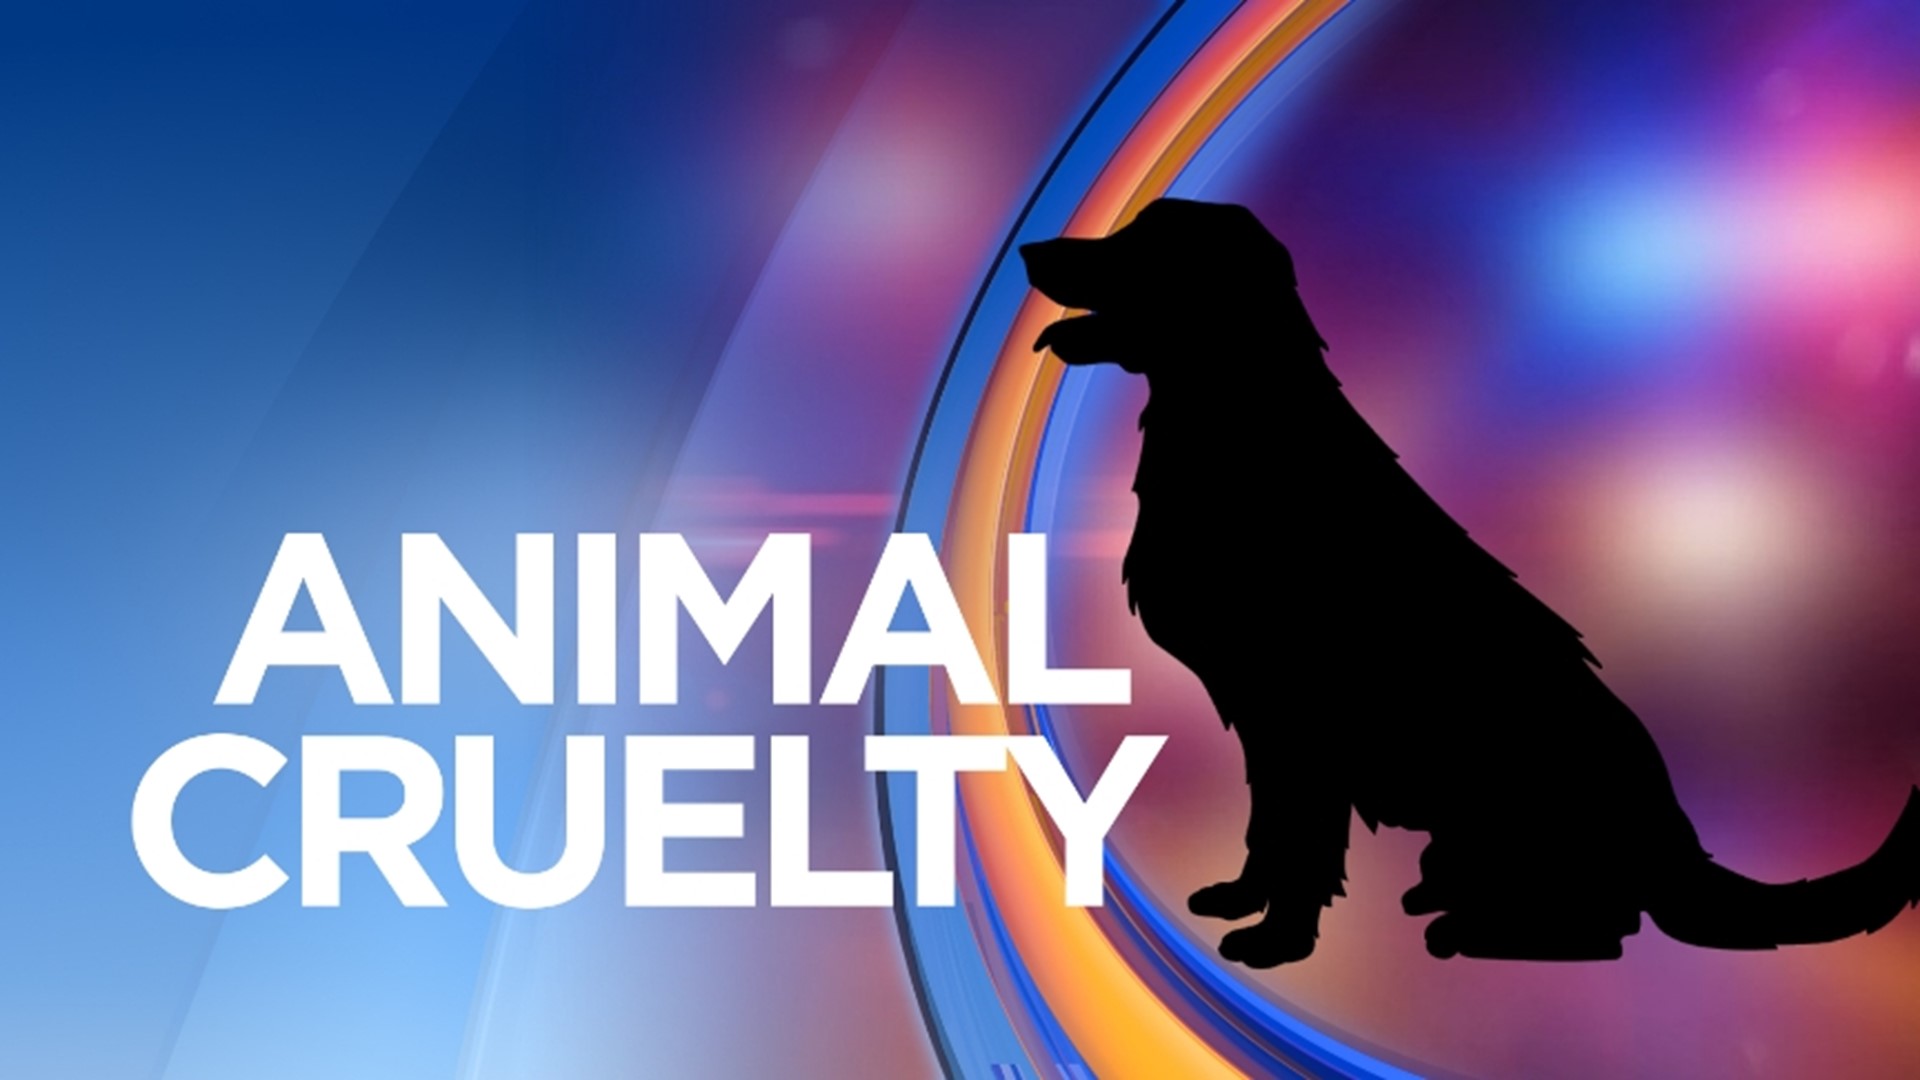 Stahl faces four counts of animal cruelty and 26 counts of animal neglect.